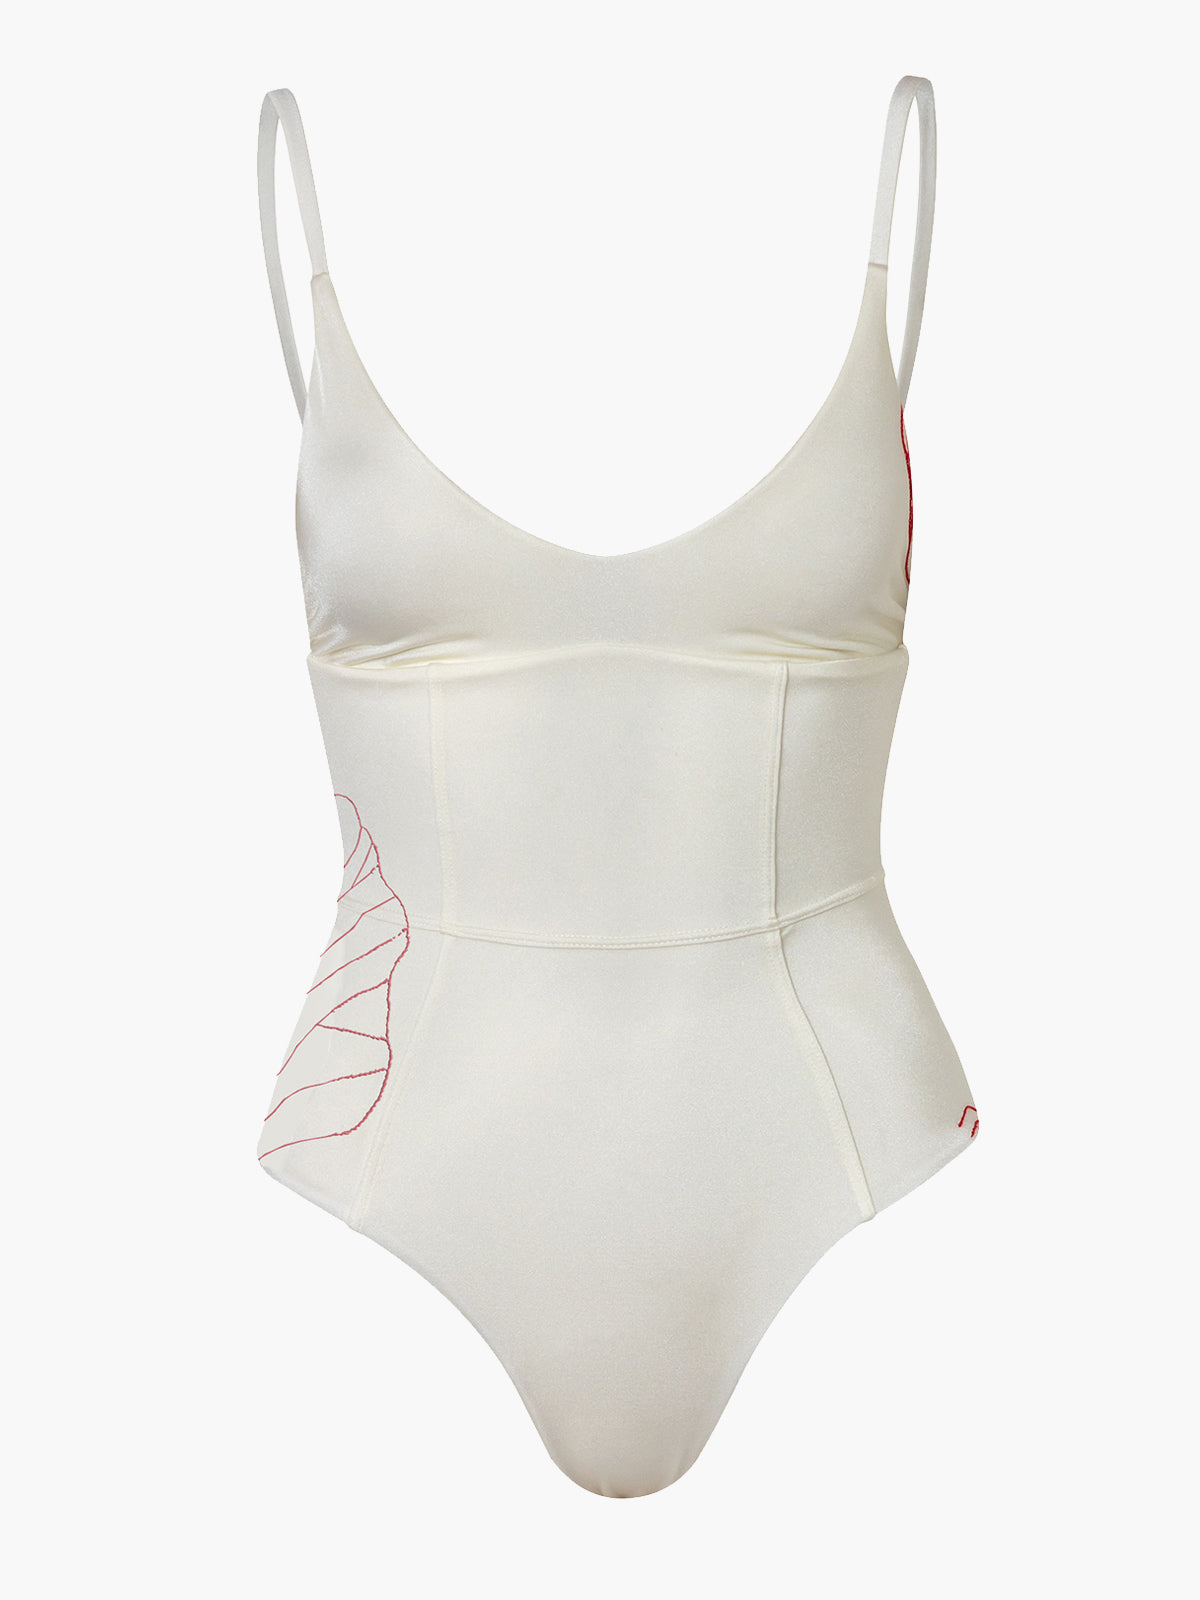 Embroidered Santo Steffano Maillot | Pearled Ivory Embroidered Santo Steffano Maillot | Pearled Ivory